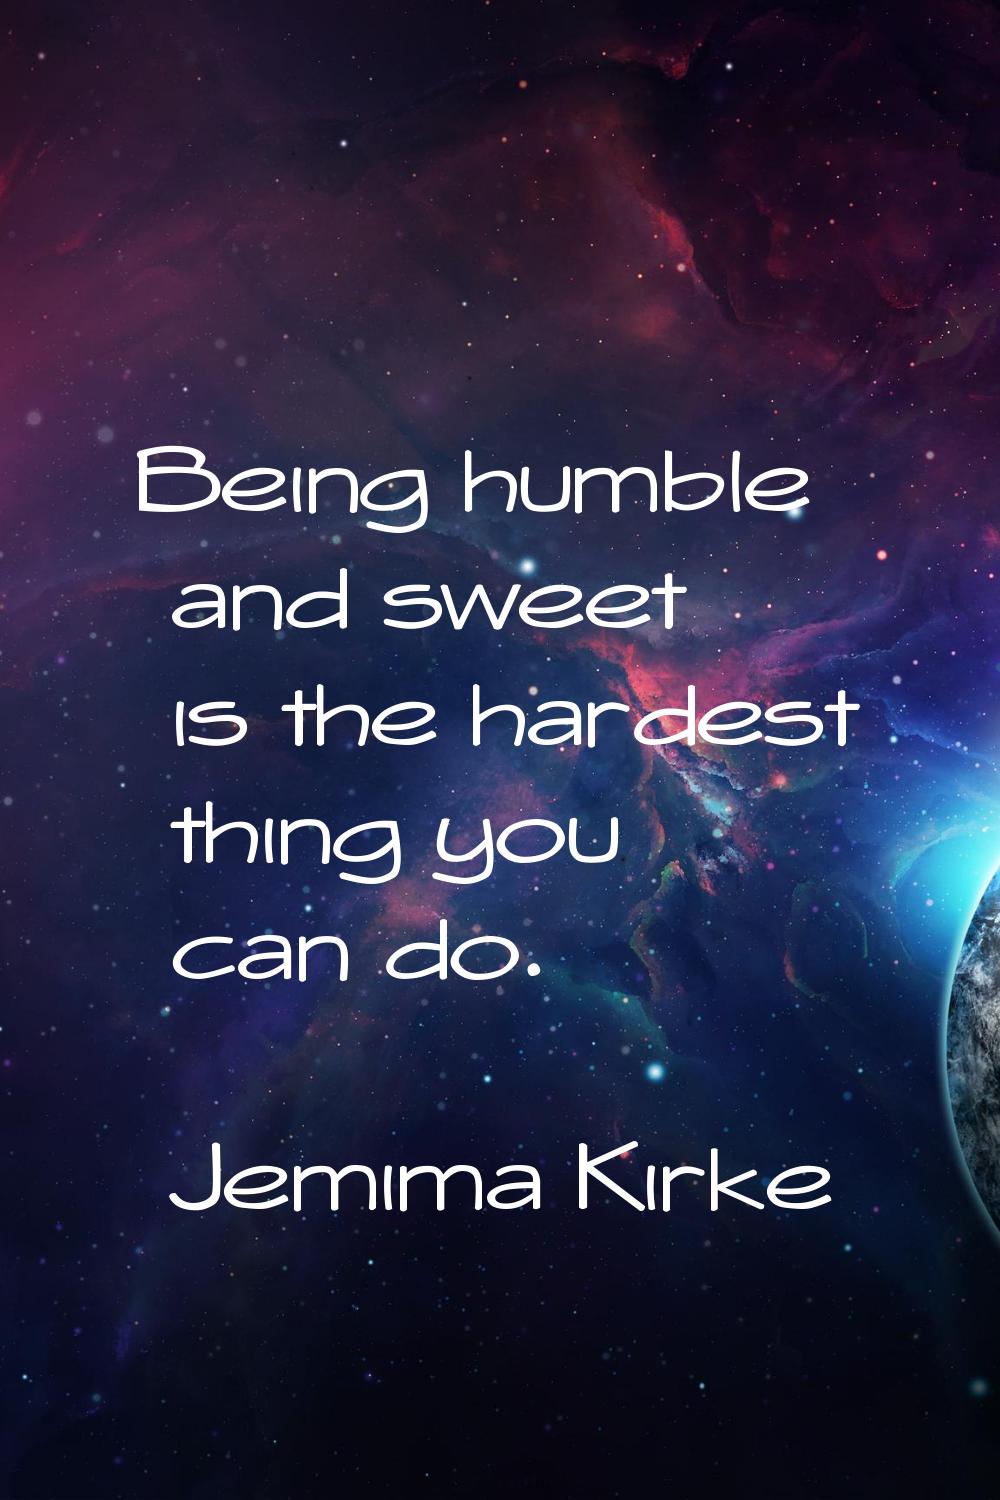 Being humble and sweet is the hardest thing you can do.